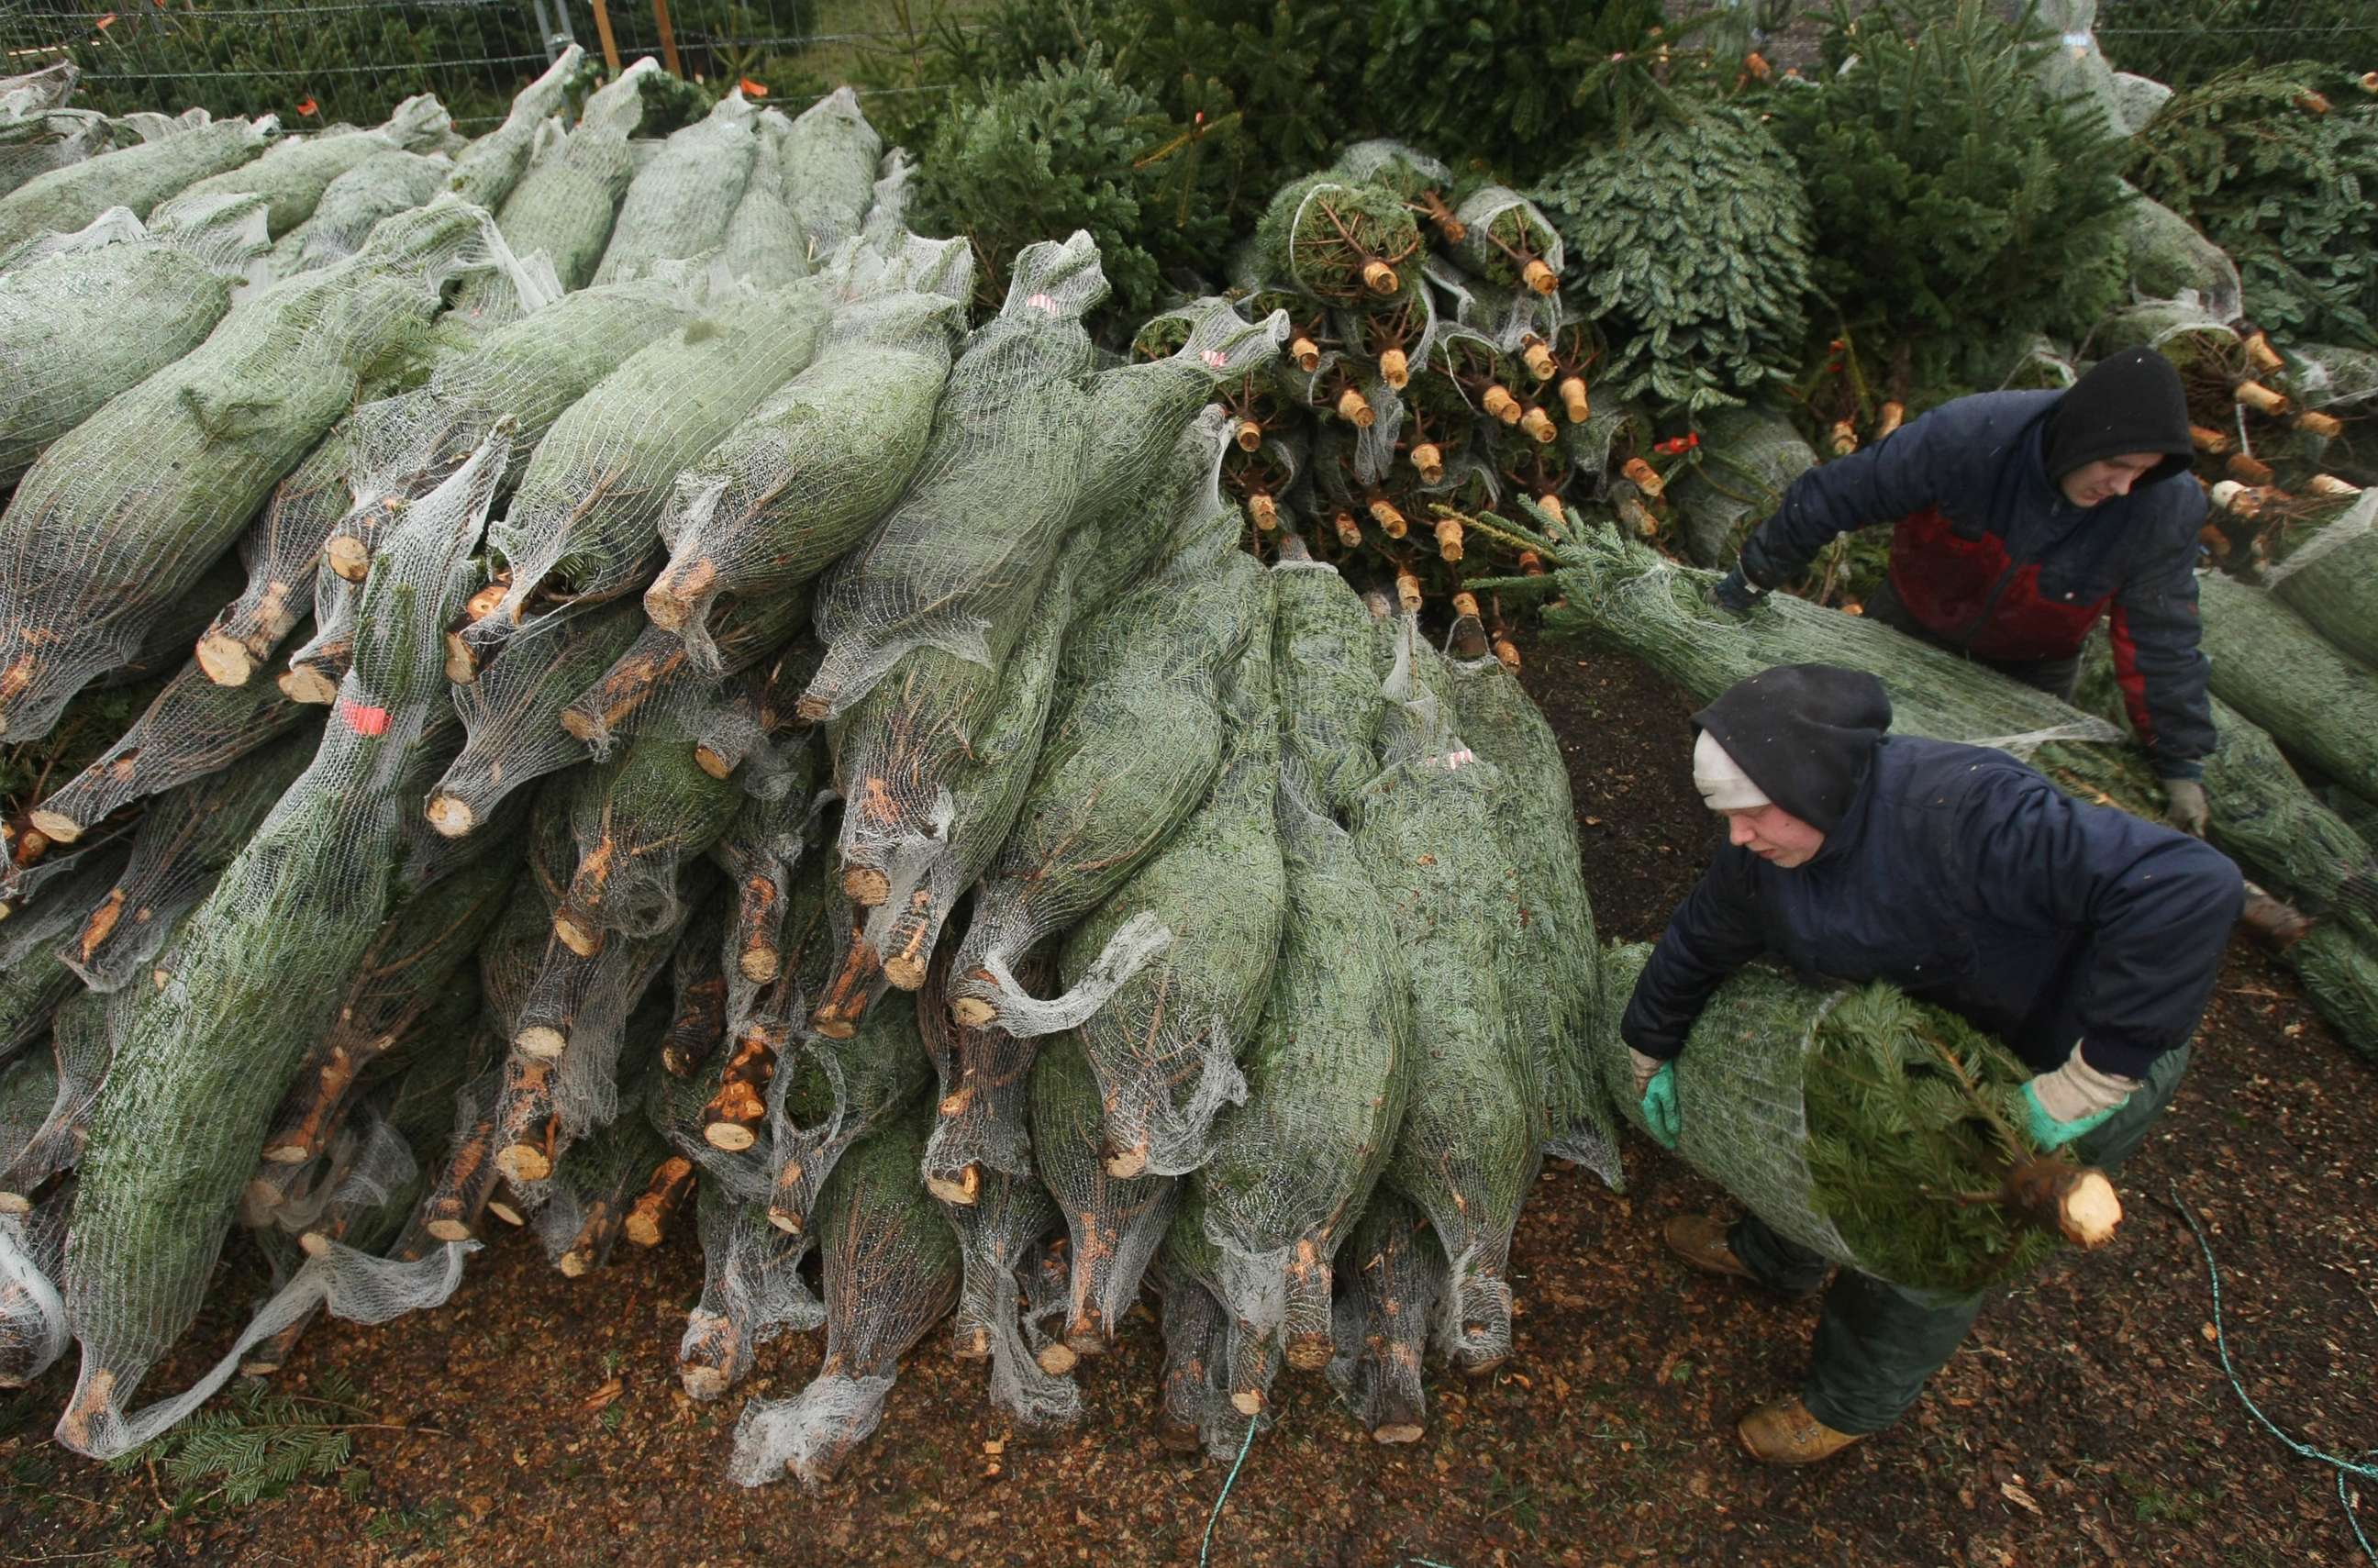 PHOTO: Workers at an outdoor Christmas tree market prepare Christmas trees for sale.